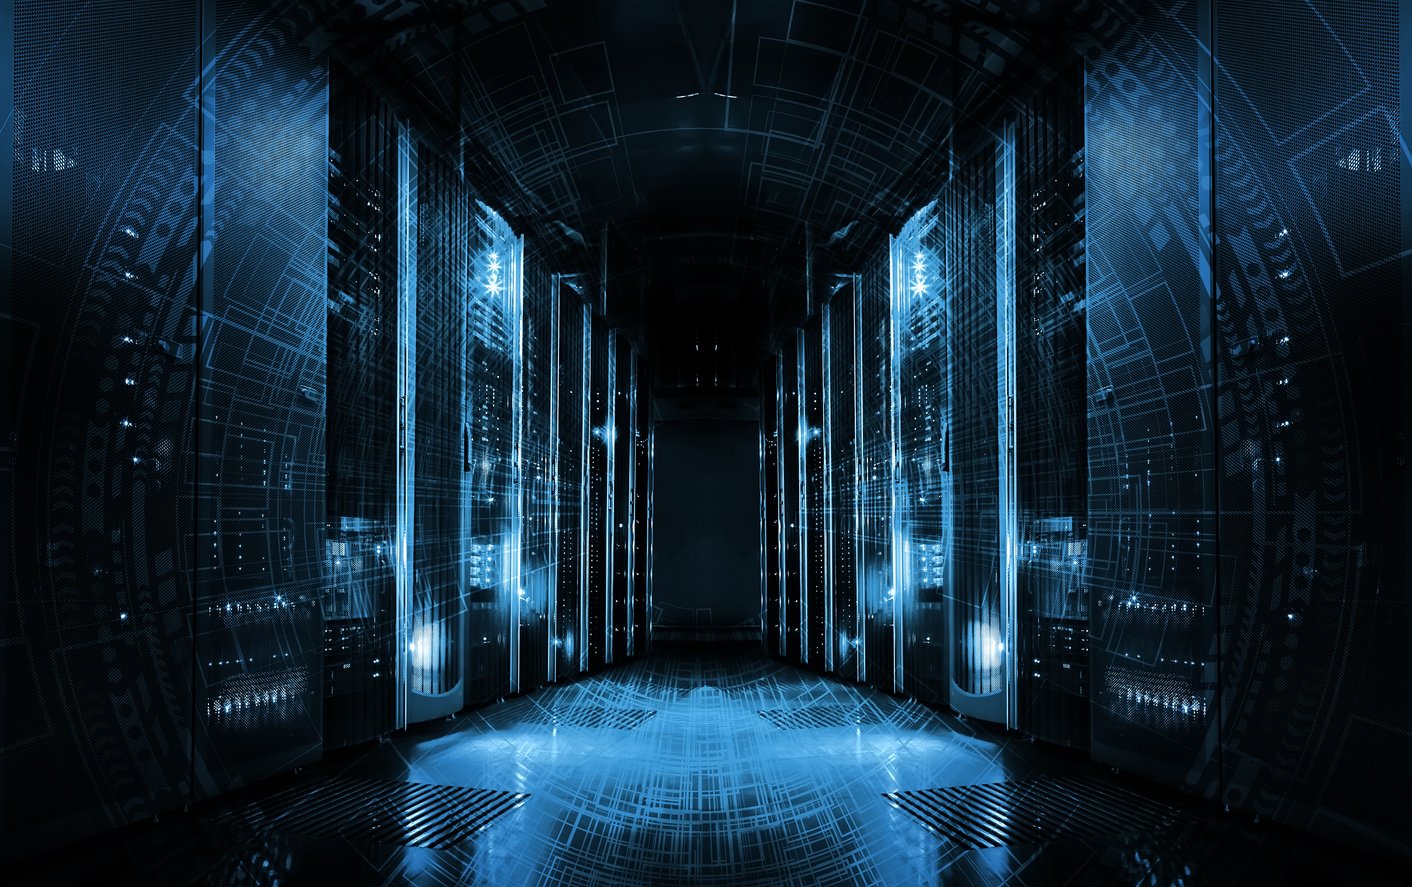 technological background on servers in data center, futuristic design. Server room represented by several server racks with strong dramatic light.